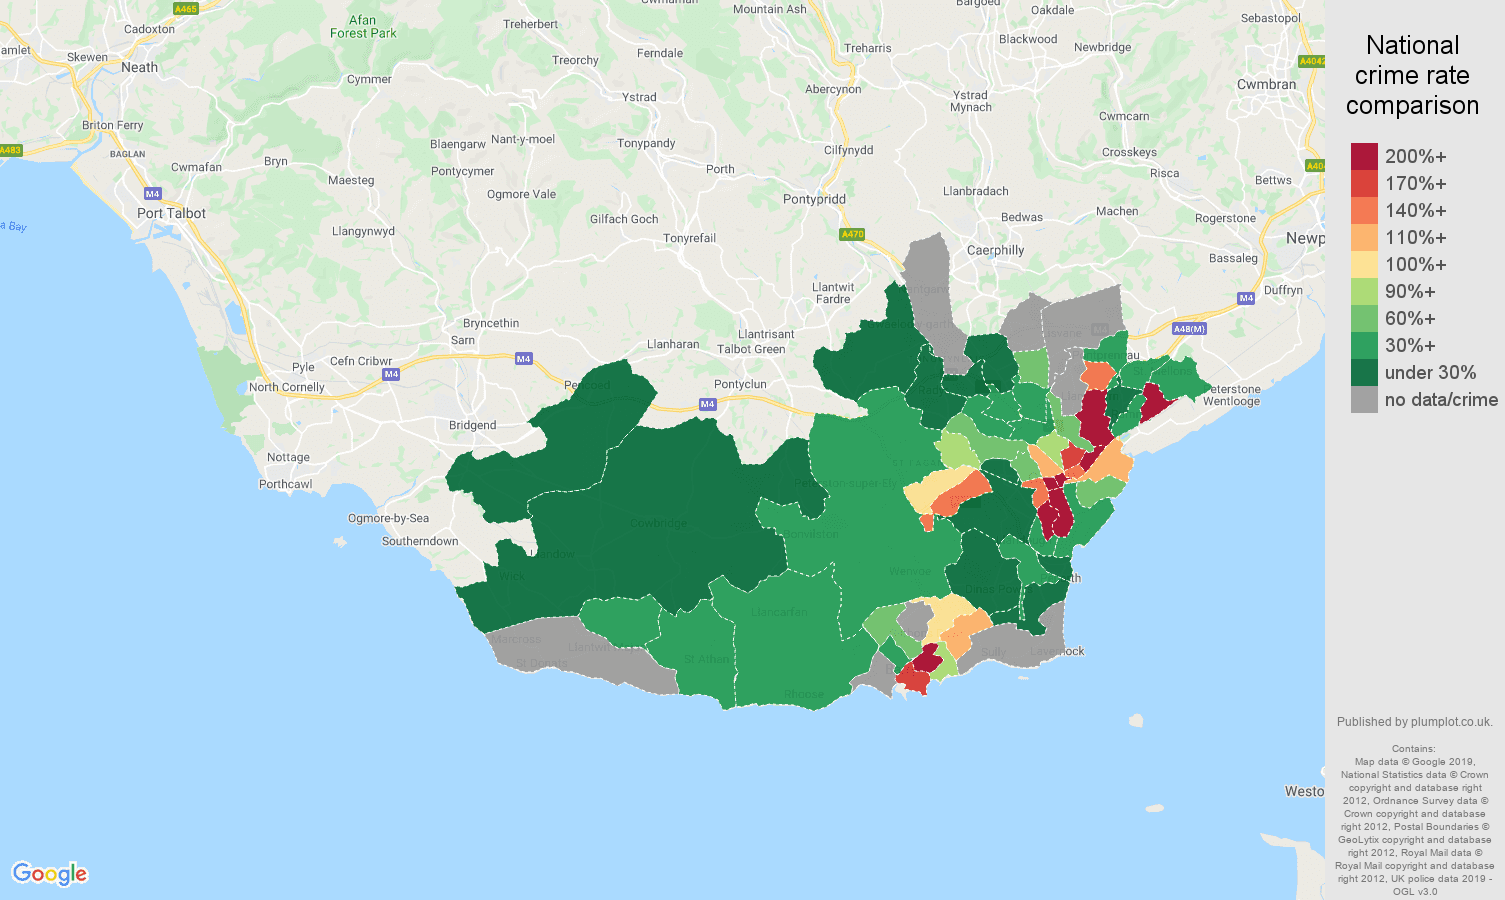 South Glamorgan possession of weapons crime rate comparison map